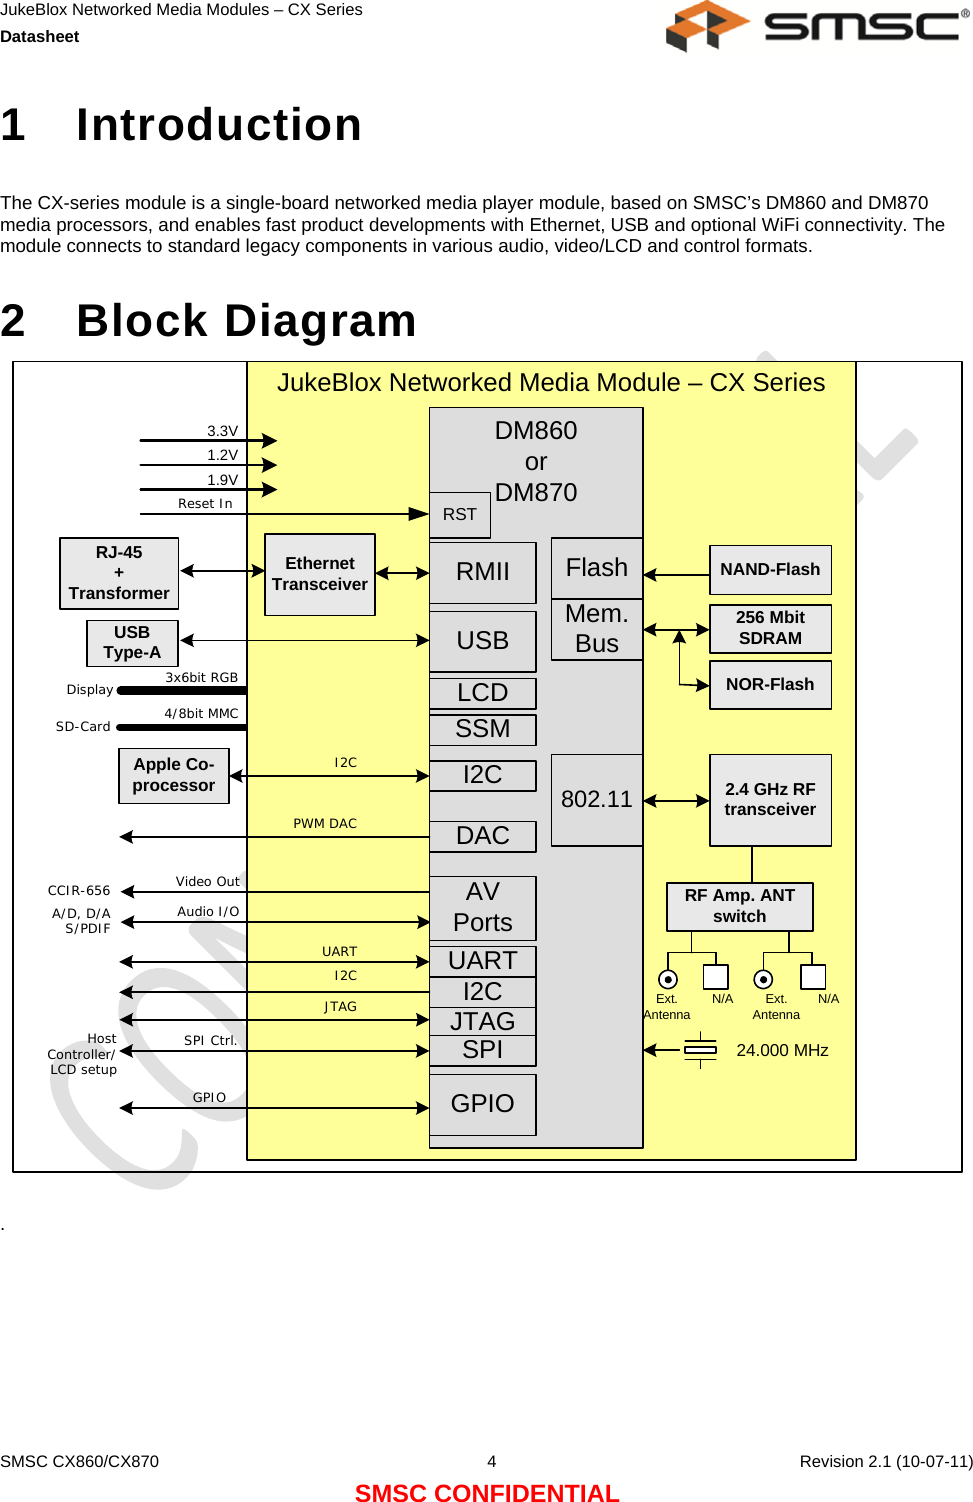 JukeBlox Networked Media Modules – CX Series  Datasheet    SMSC CX860/CX870  4    Revision 2.1 (10-07-11) SMSC CONFIDENTIAL 1 Introduction  The CX-series module is a single-board networked media player module, based on SMSC’s DM860 and DM870 media processors, and enables fast product developments with Ethernet, USB and optional WiFi connectivity. The module connects to standard legacy components in various audio, video/LCD and control formats.  2 Block Diagram Ethernet TransceiverDM860orDM870 256 MbitSDRAMRJ-45+ Transformer Mem. BusUSBGPIO24.000 MHzNAND-Flash2.4 GHz RF transceiver802.11RMIII2CUSBType-AUART3.3VJukeBlox Networked Media Module – CX Series1.2VUARTGPIODAC1$RF Amp. ANT switchExt.AntennaPWM DAC1.9VFlashNOR-FlashI2CApple Co-processorI2CJTAGI2CJTAGLCD3x6bit RGBDisplaySSM4/8bit MMCSD-CardRSTReset InVideo OutAudio I/OA/D, D/AS/PDIFCCIR-656 AV PortsSPISPI Ctrl.Host Controller/LCD setup1$Ext.Antenna  . 